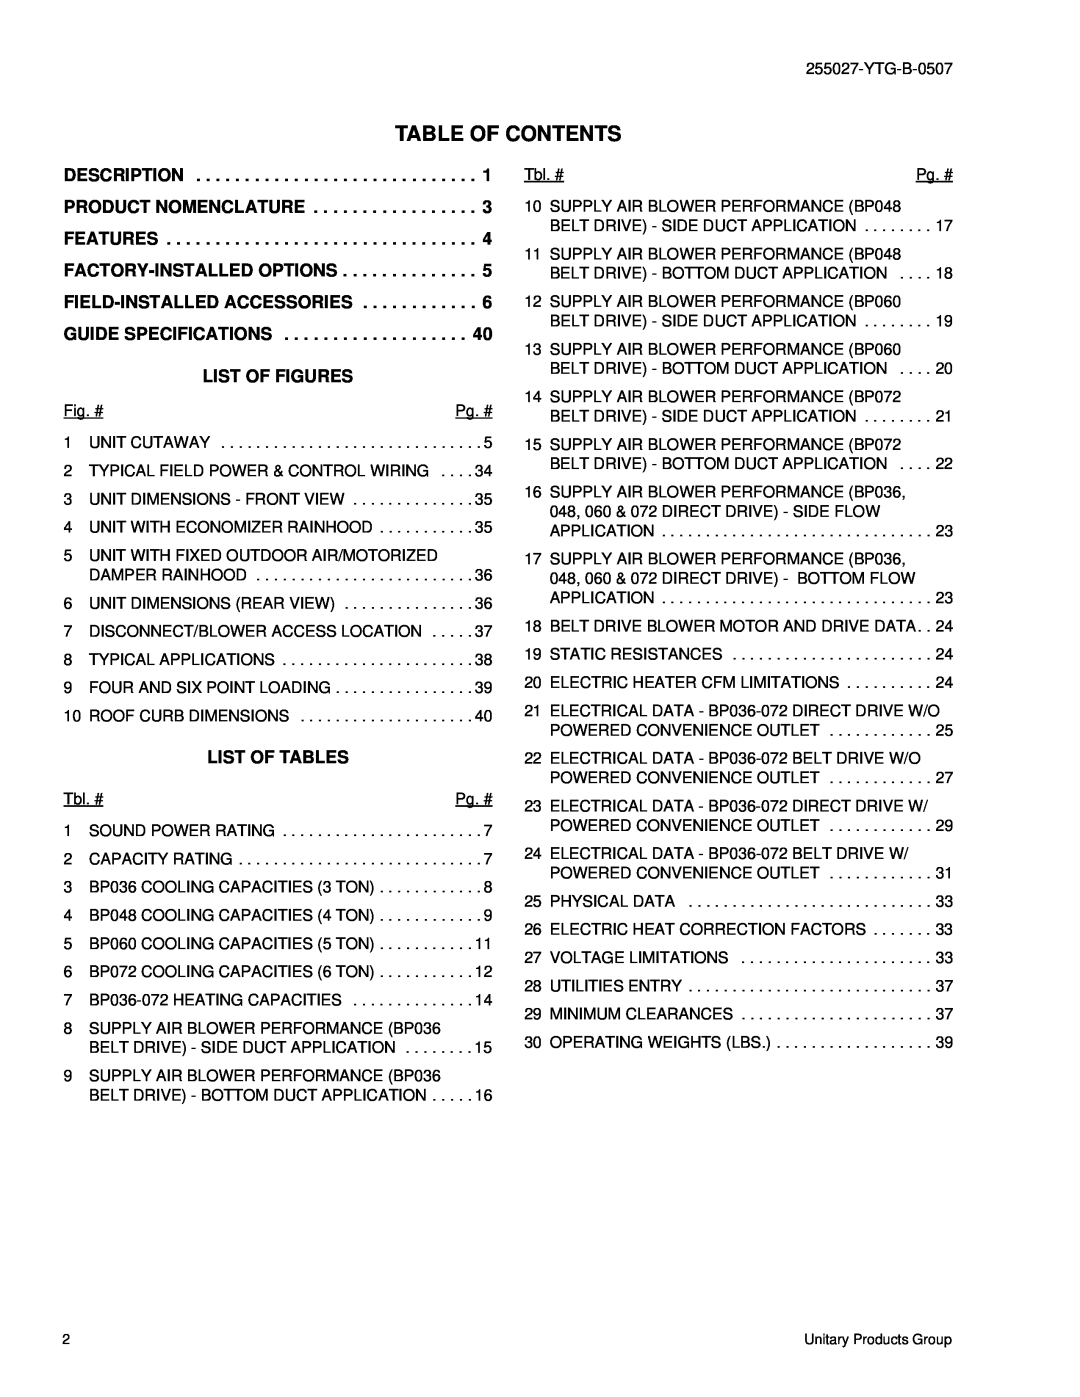 York BP 036 warranty Table Of Contents, List Of Figures, List Of Tables 